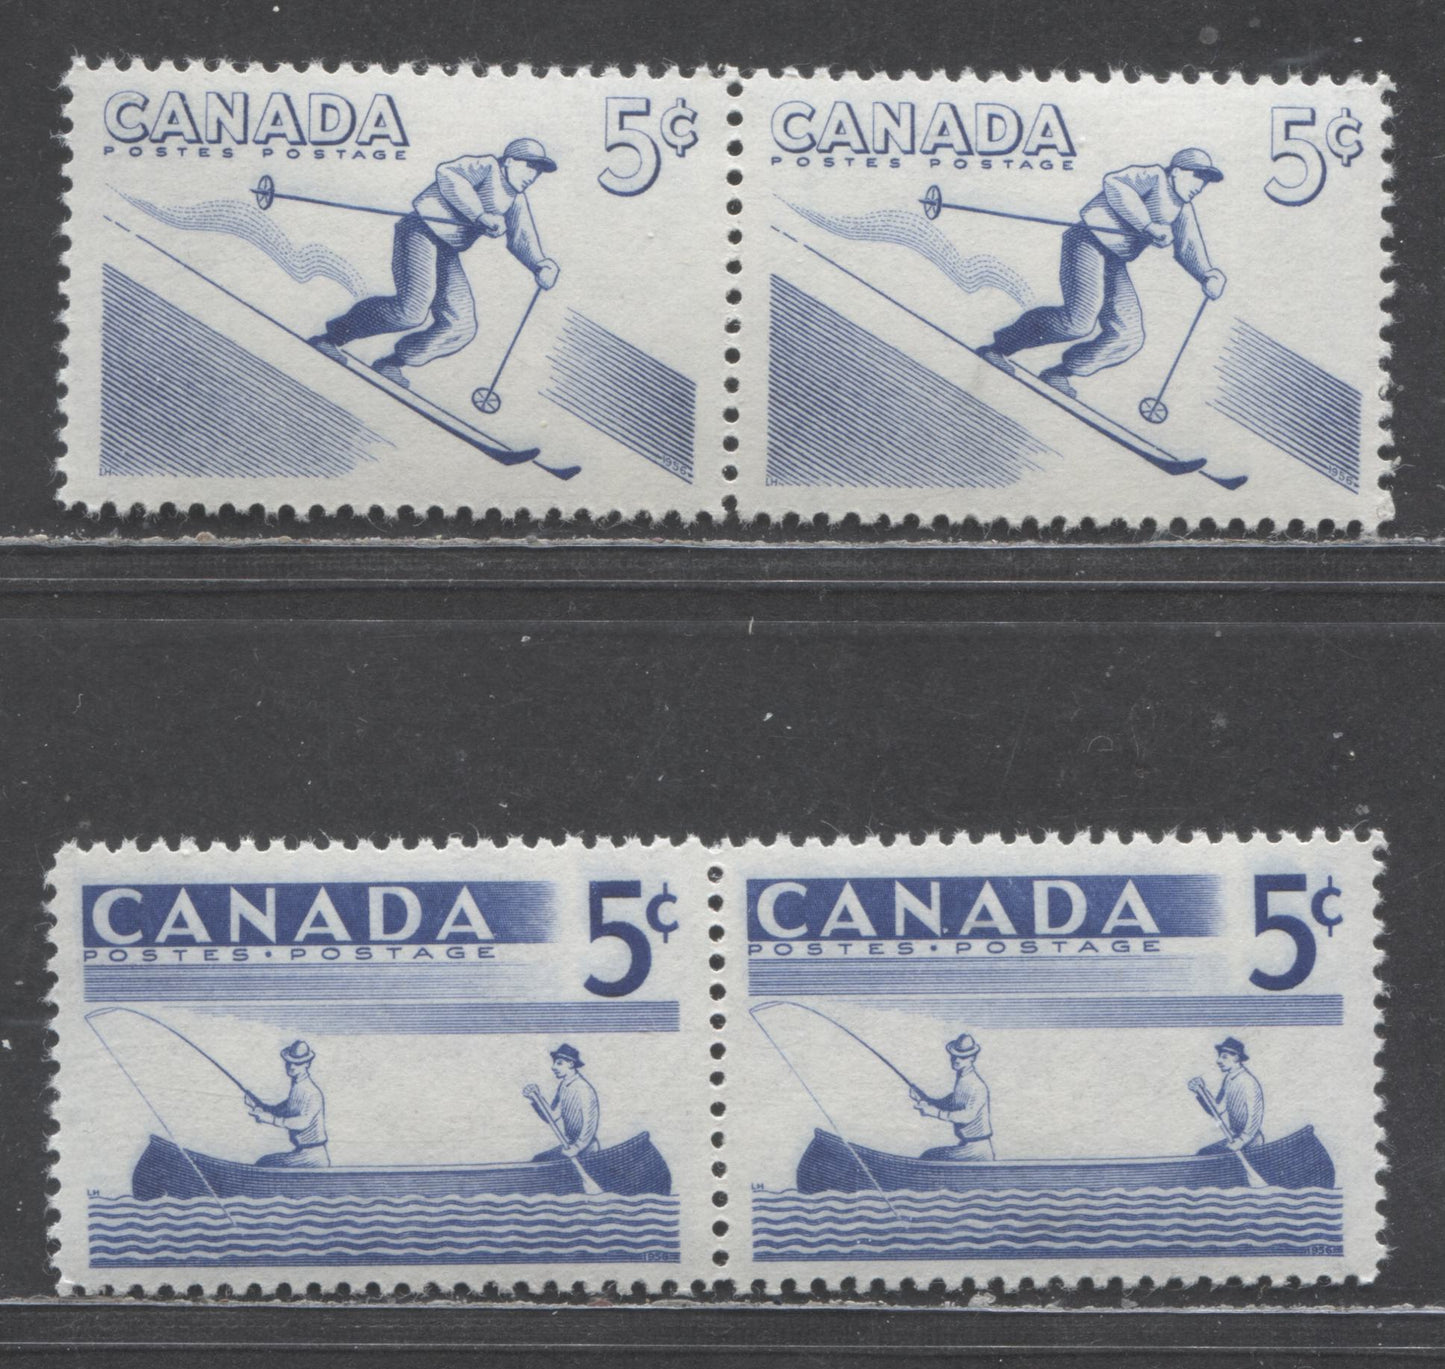 Canada #365i, 368i 5c Deep Ultramarine Skiing, Canoeing, 1957 Recreational Sports Issue, 2 VFNH Identical Pairs,Smooth Paper, Ribbed On Back, Streaky Cream Semi-Gloss Gum, Scarce, As Most Would Have Been Split